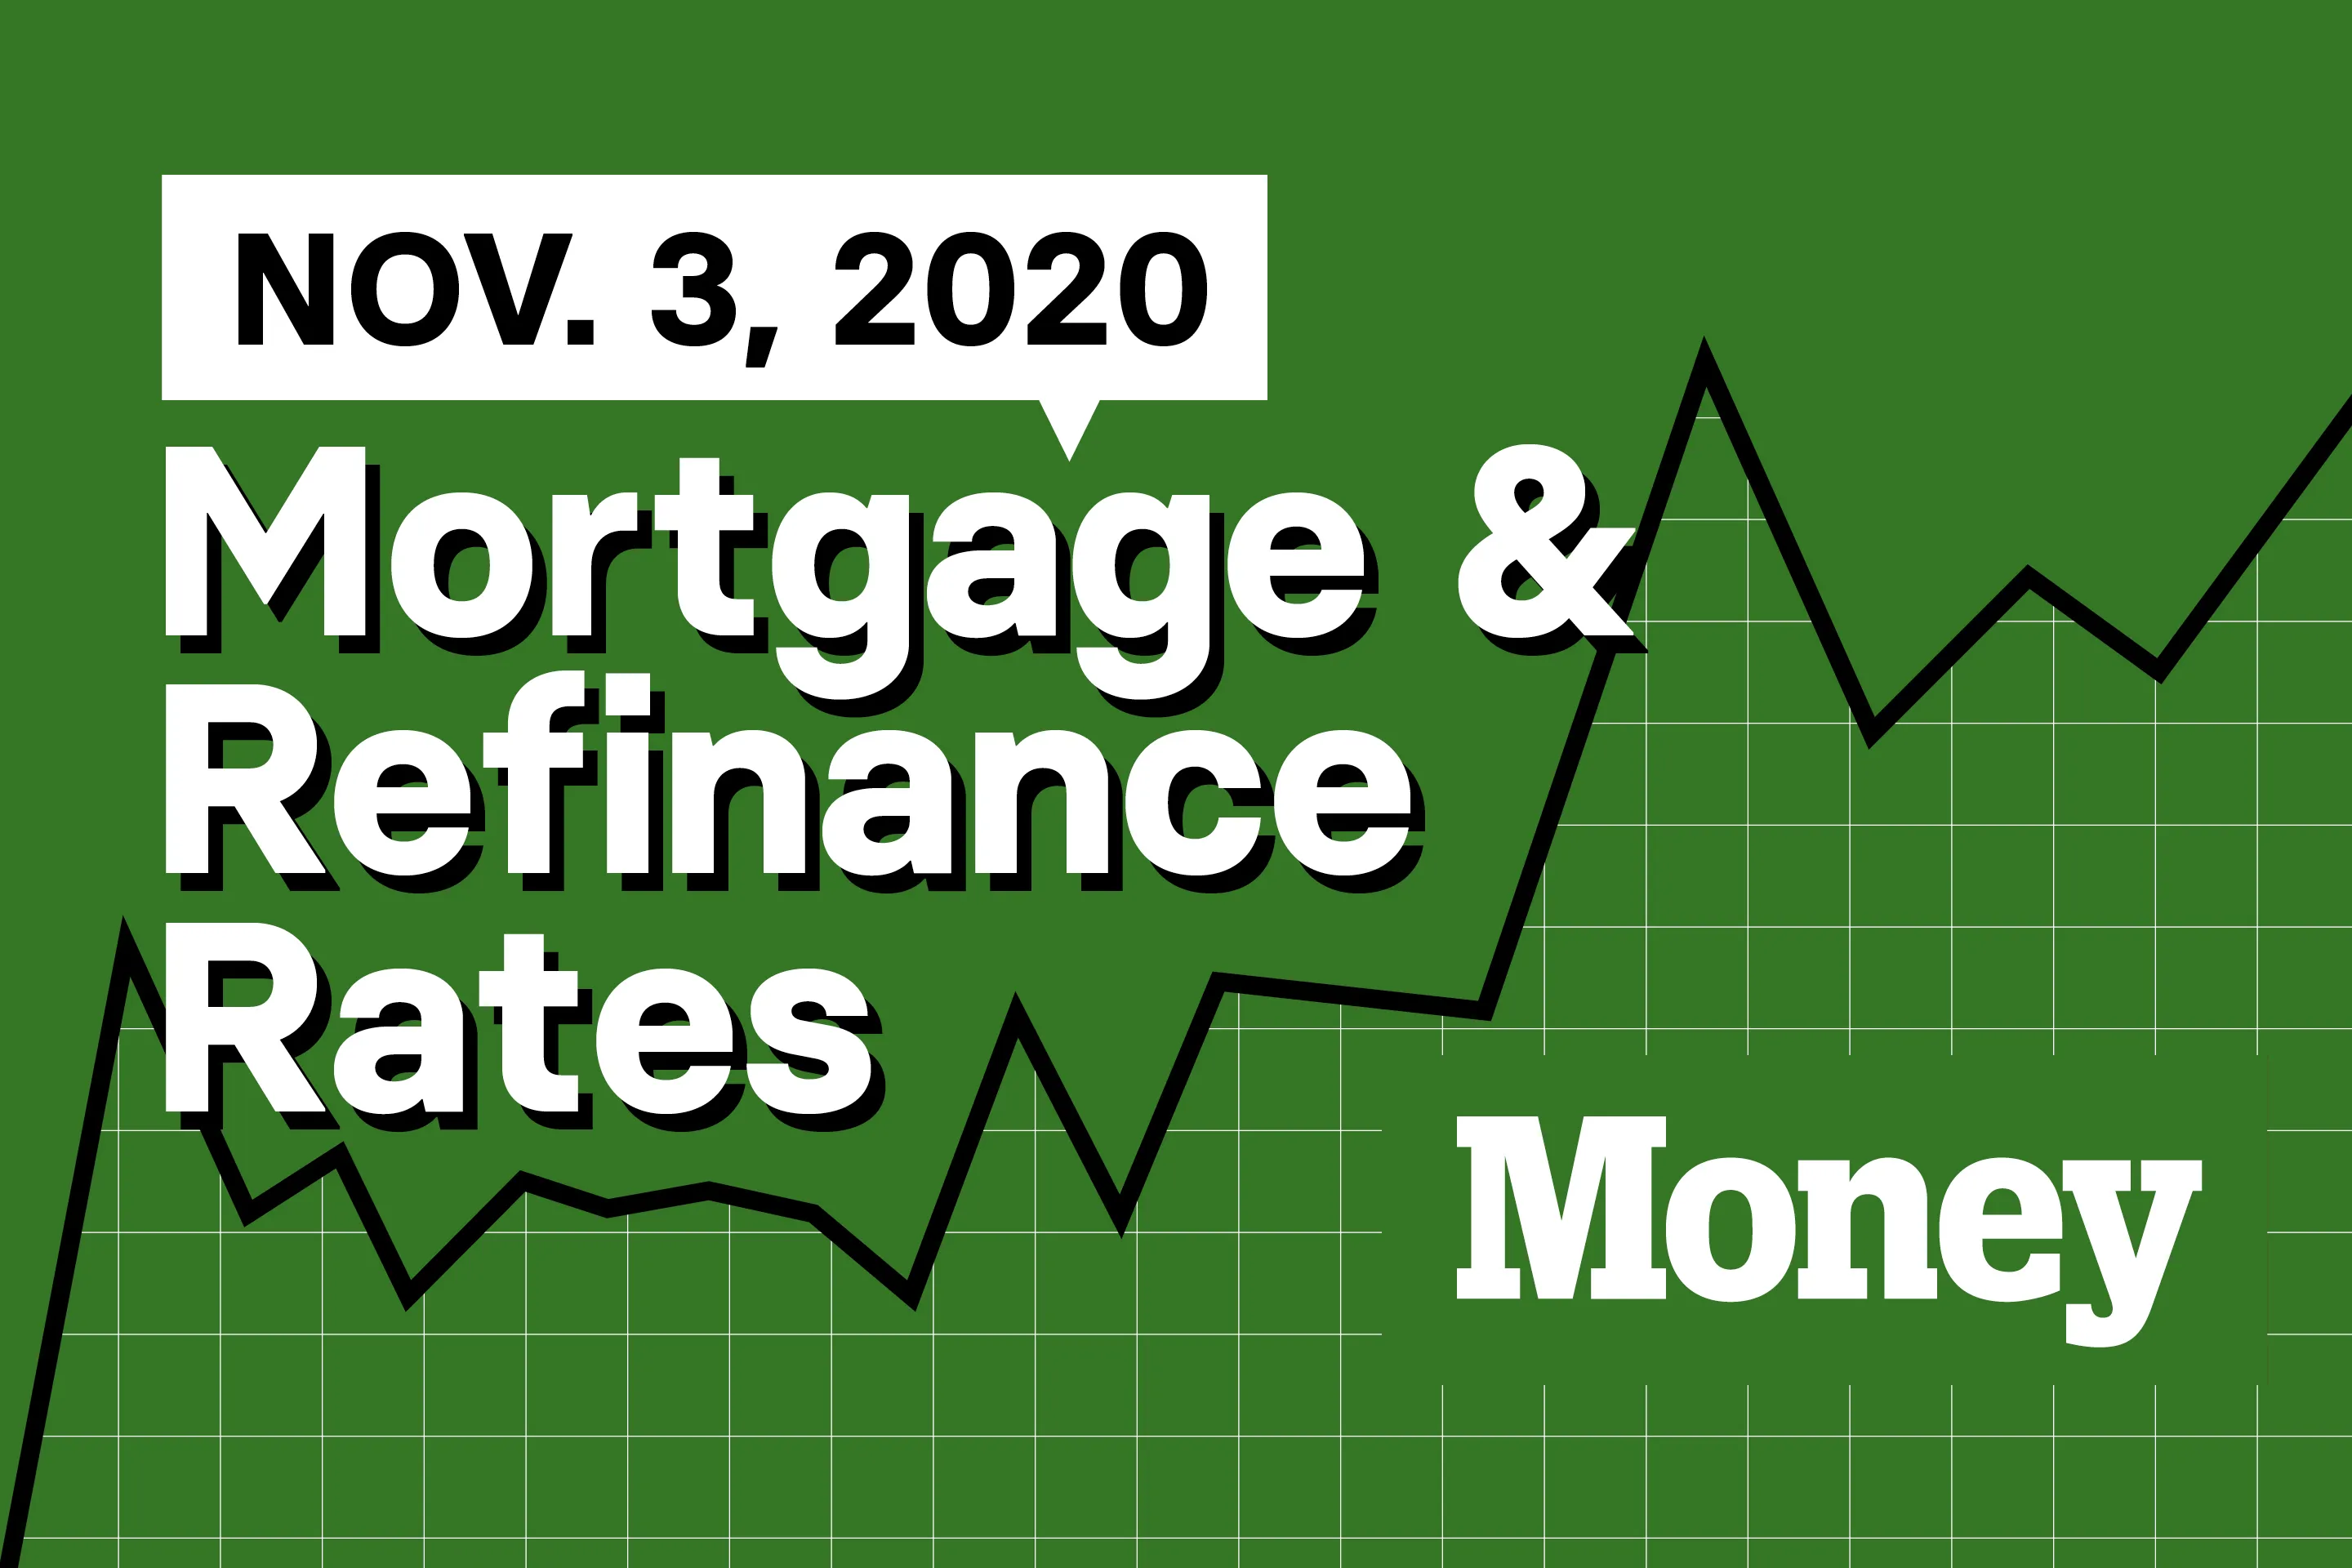 Here Are Today's Best Mortgage & Refinance Rates for November 3, 2020